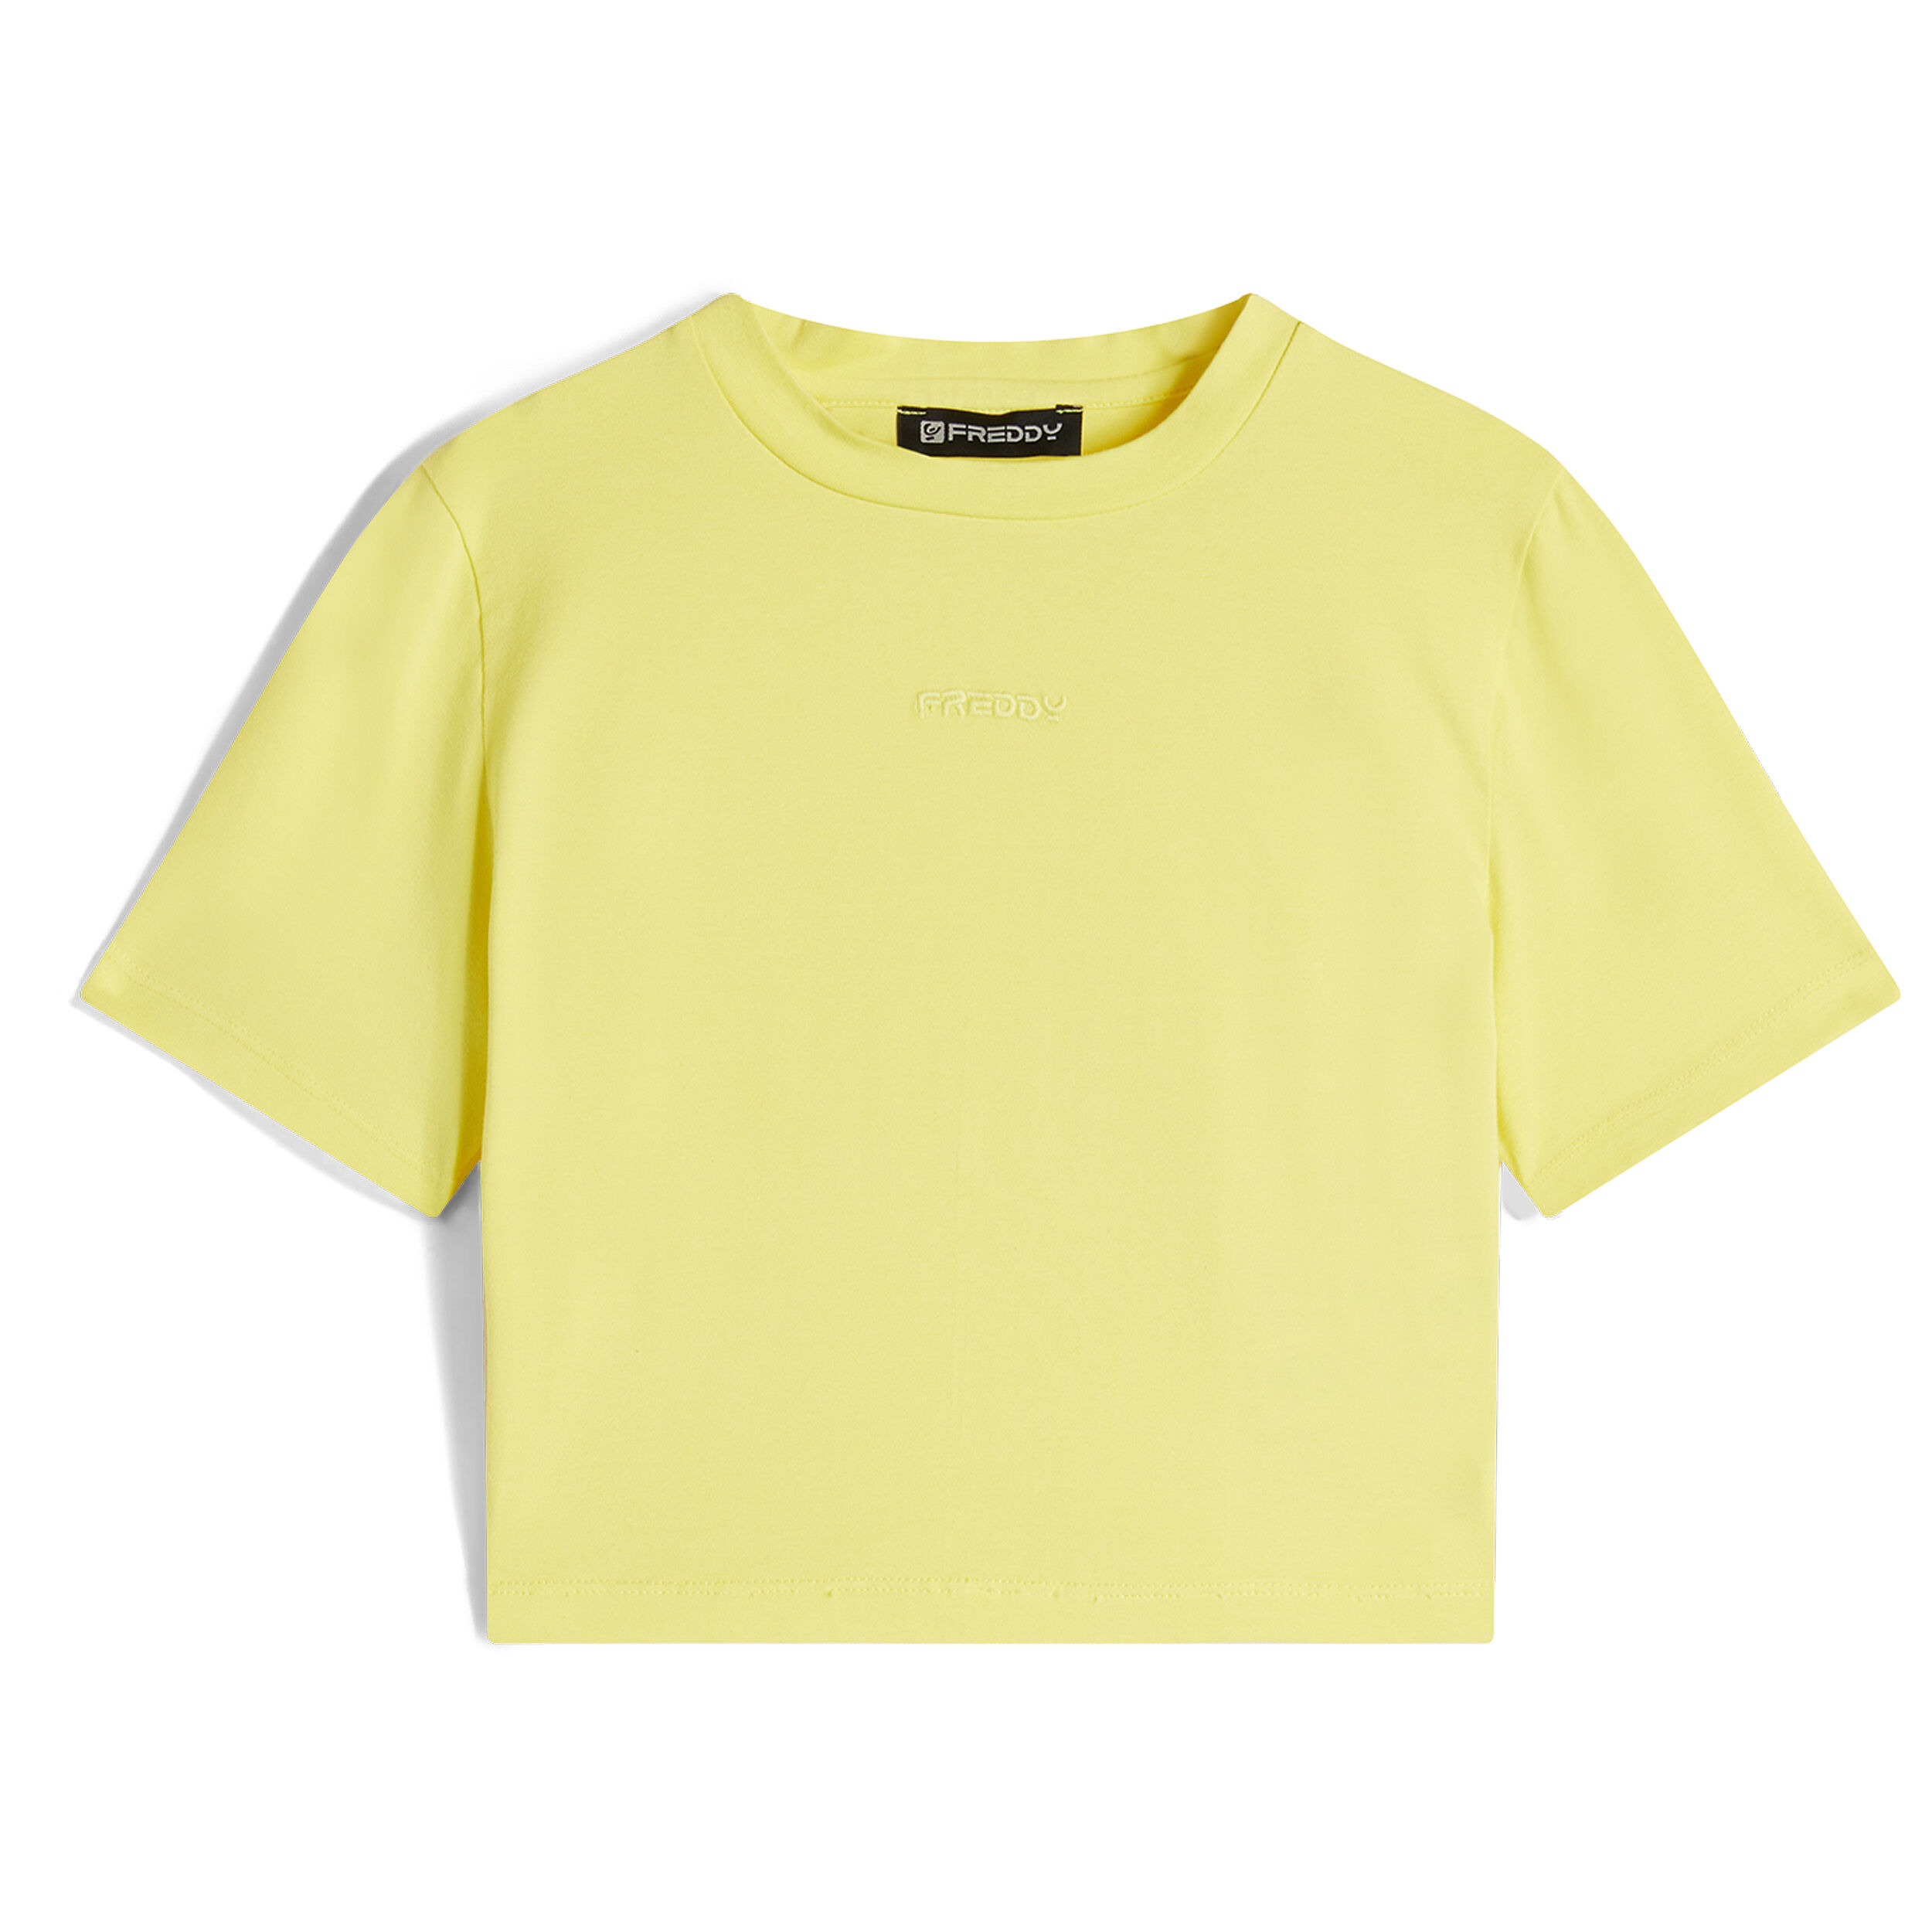 Freddy T-shirt slim fit corta in tessuto jersey tinto capo Celandine Direct Dyed Donna Small